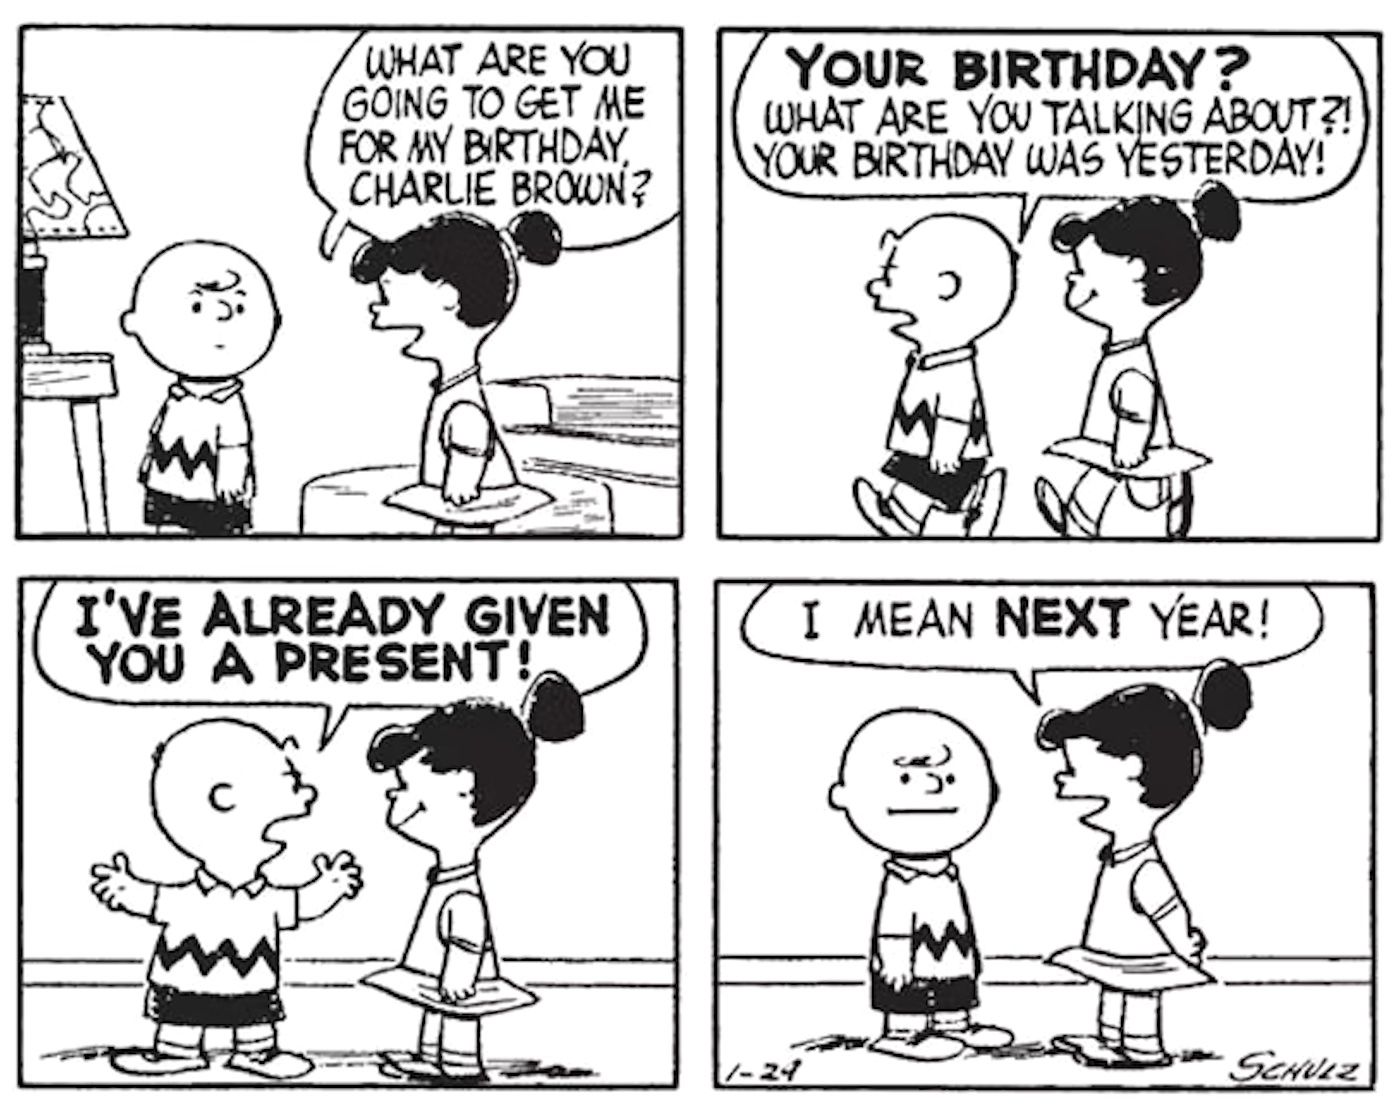 Violet from Peanuts asking Charlie Brown for a birthday present